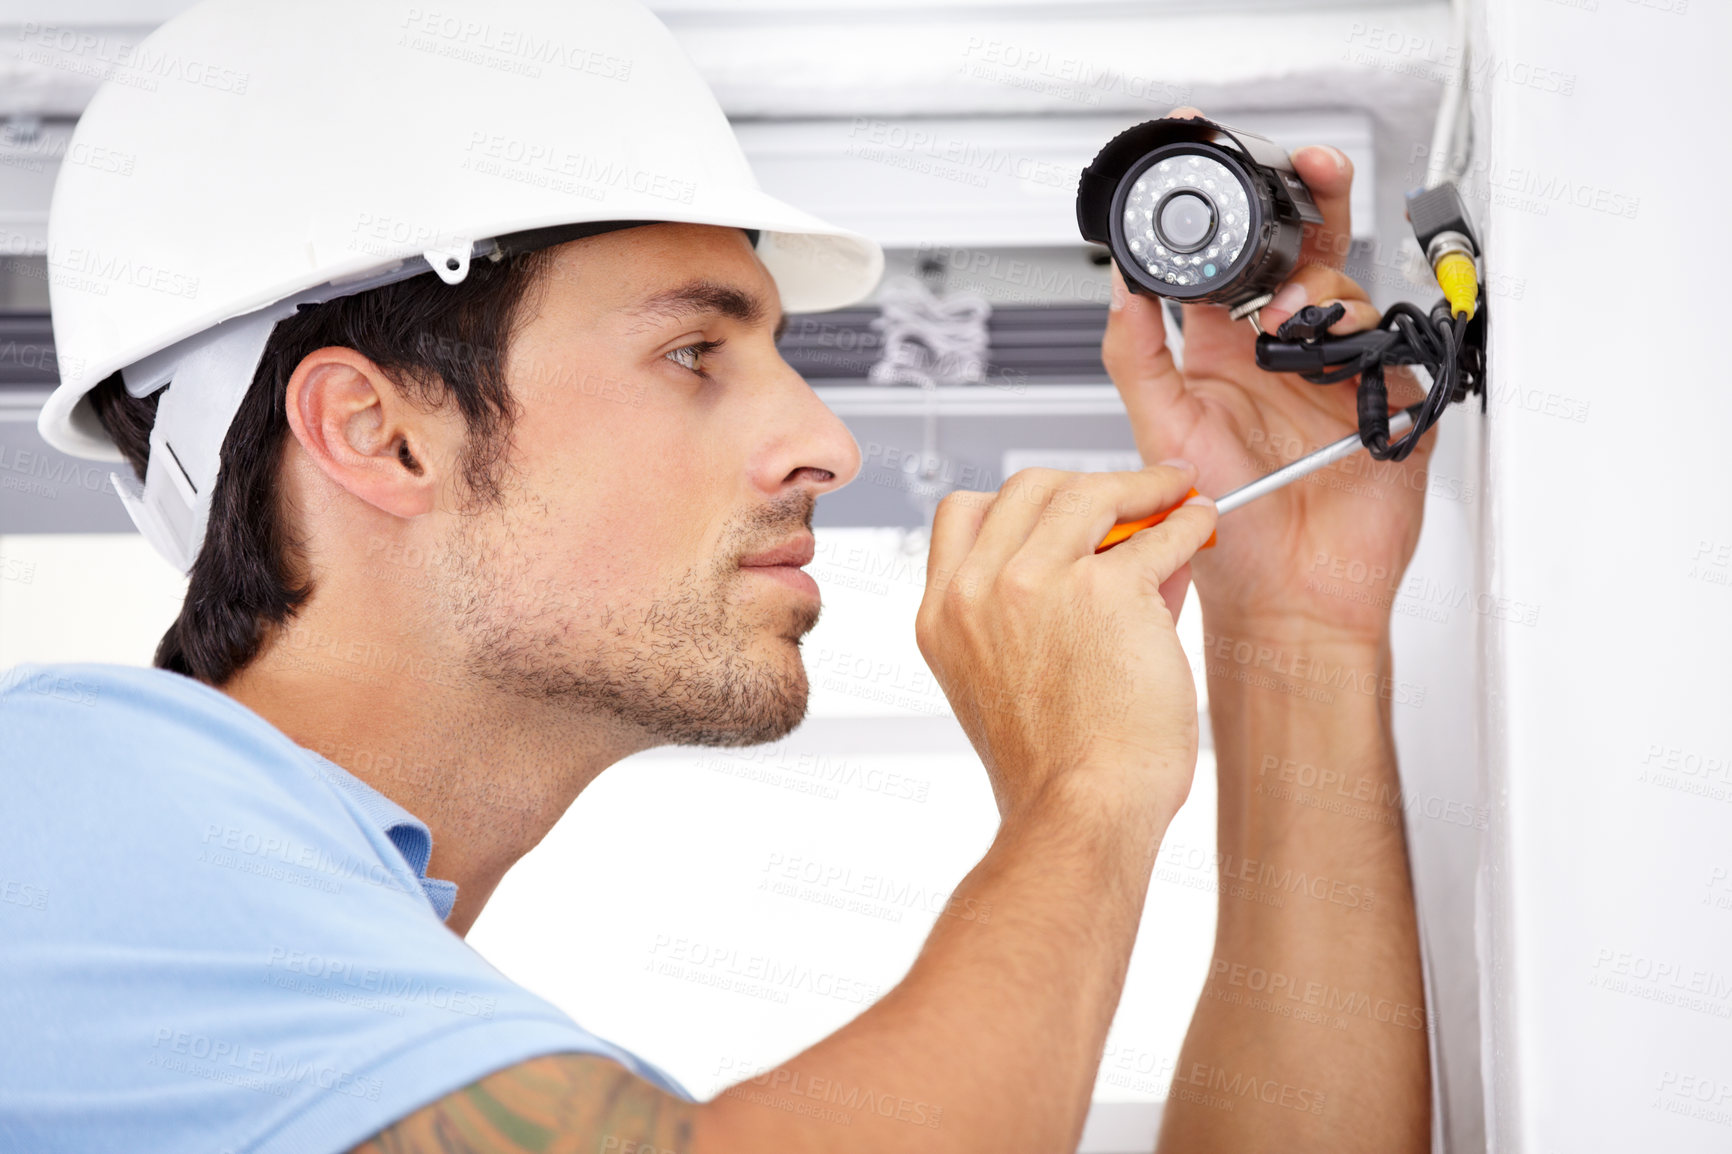 Buy stock photo Shot of a handsome young man    installing a security camera